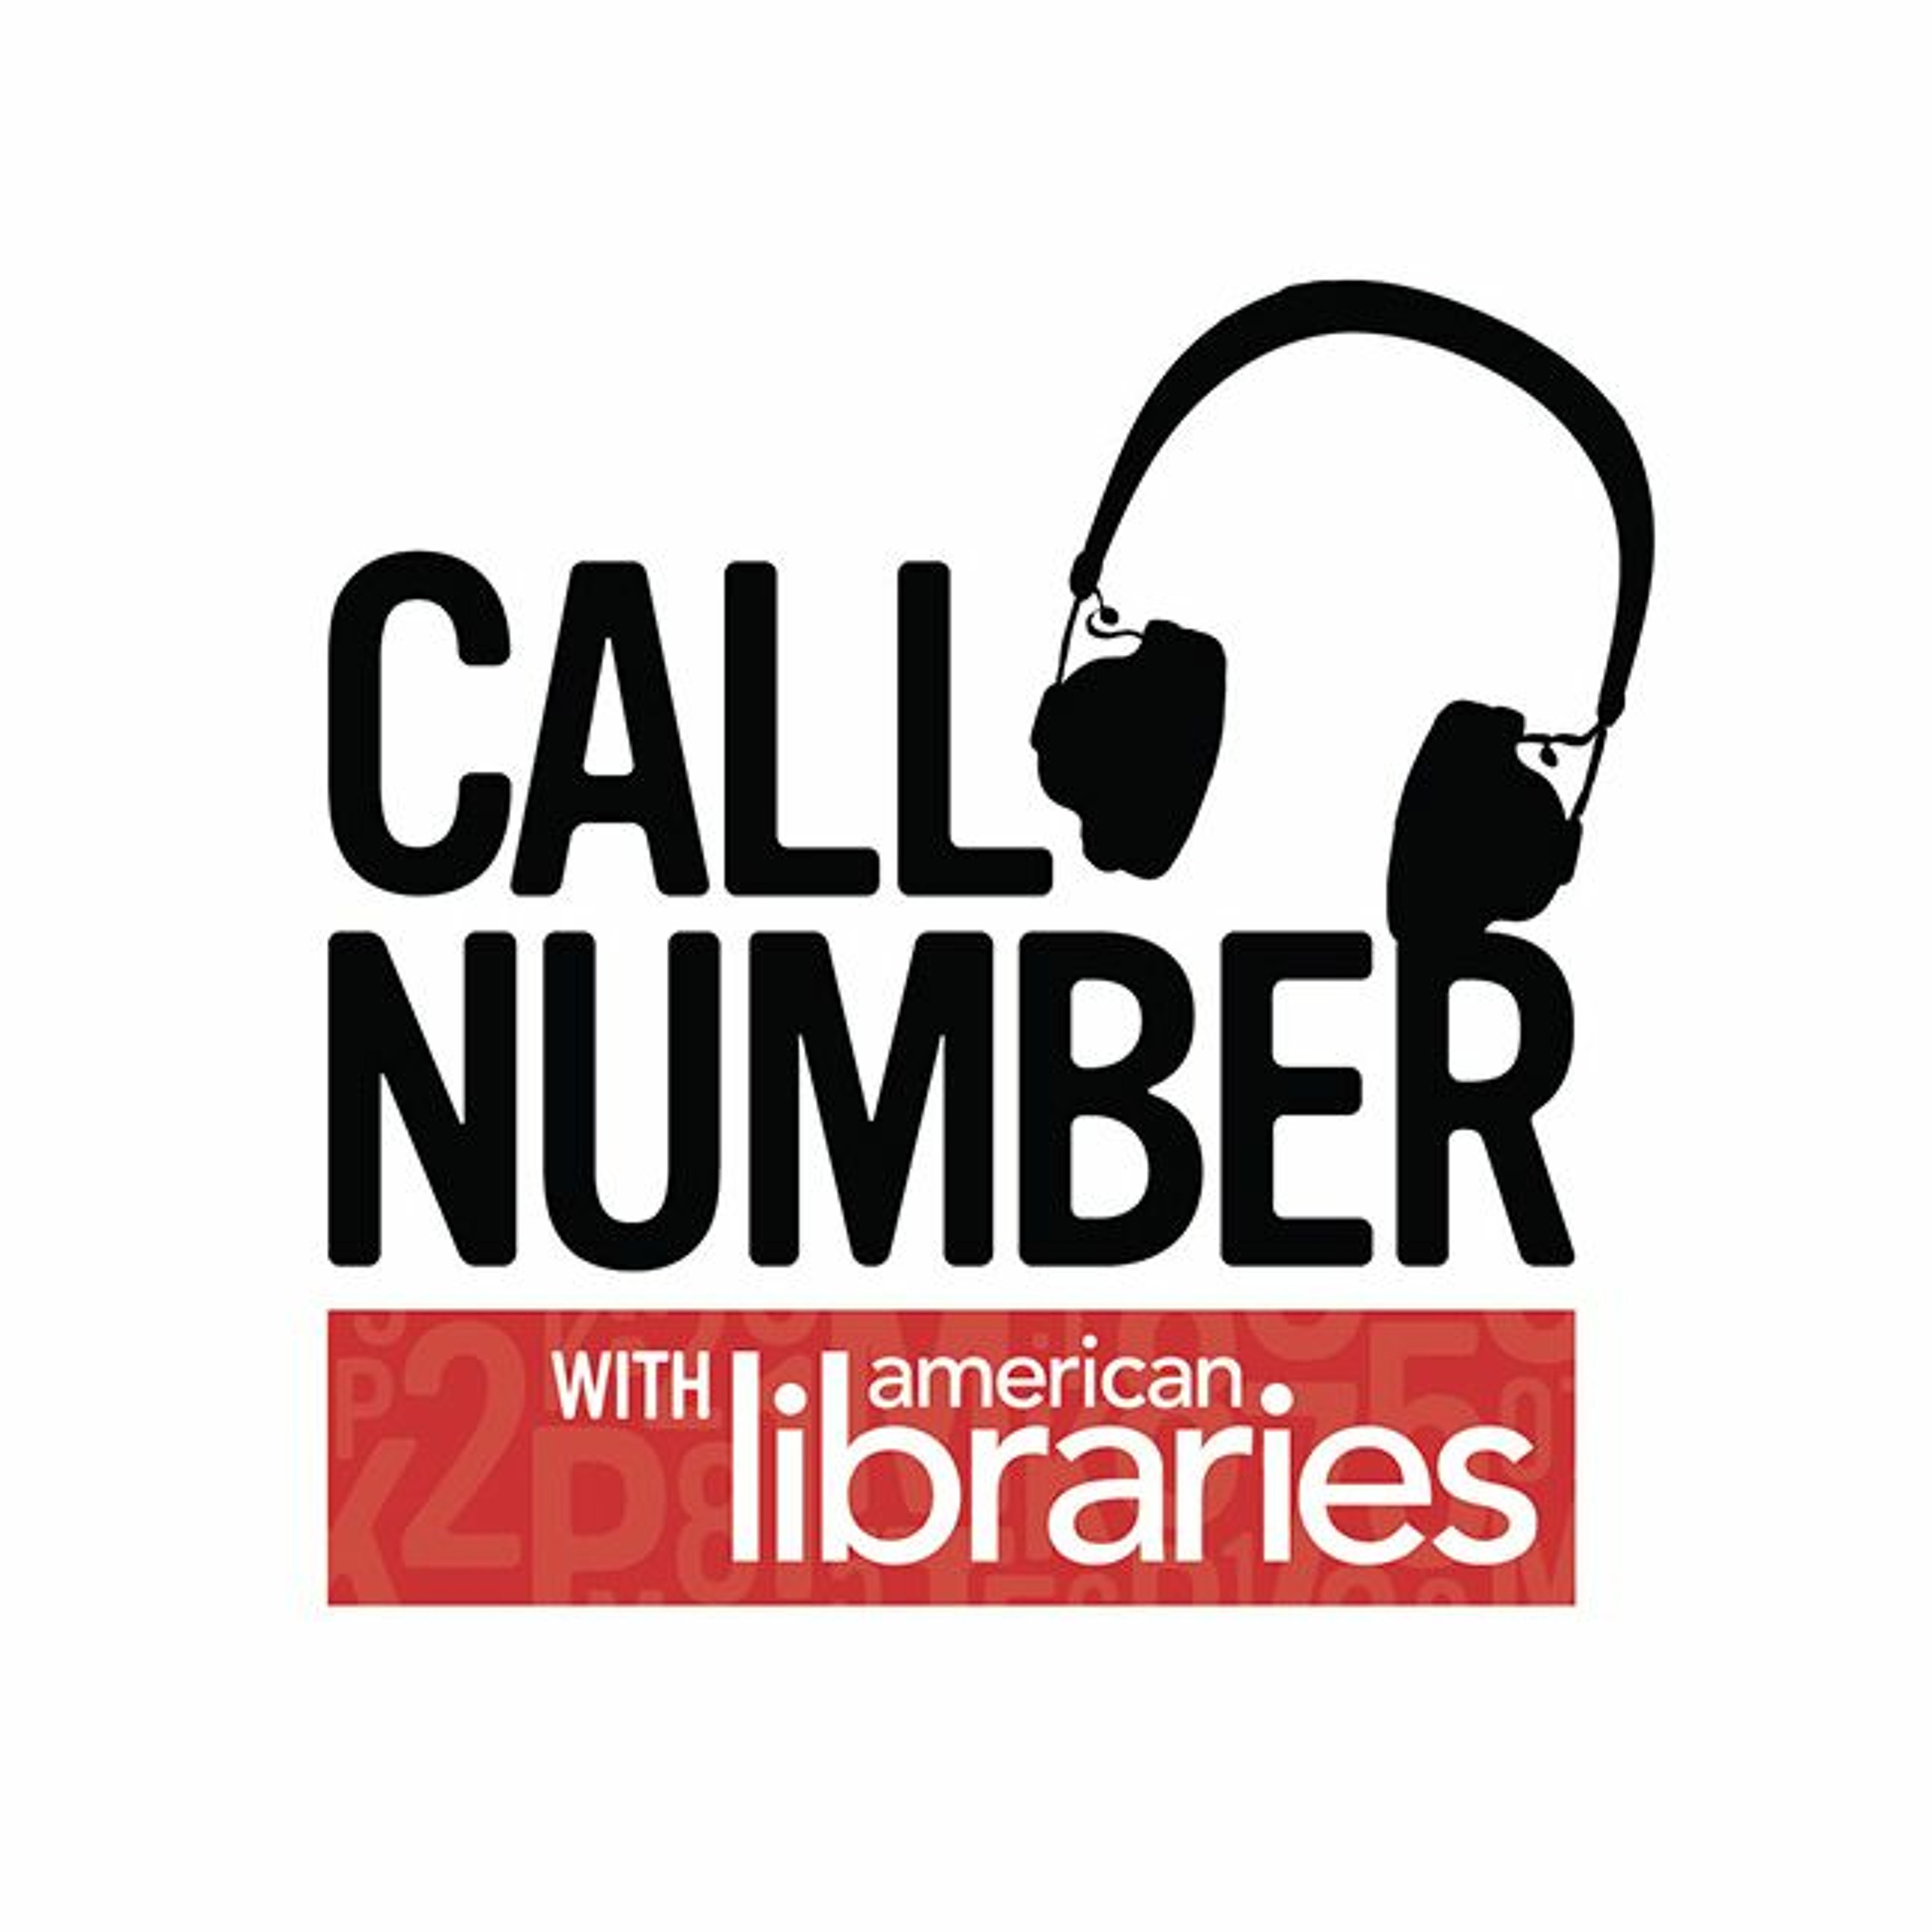 Rebroadcast of Episode 52: Libraries and Sustainability